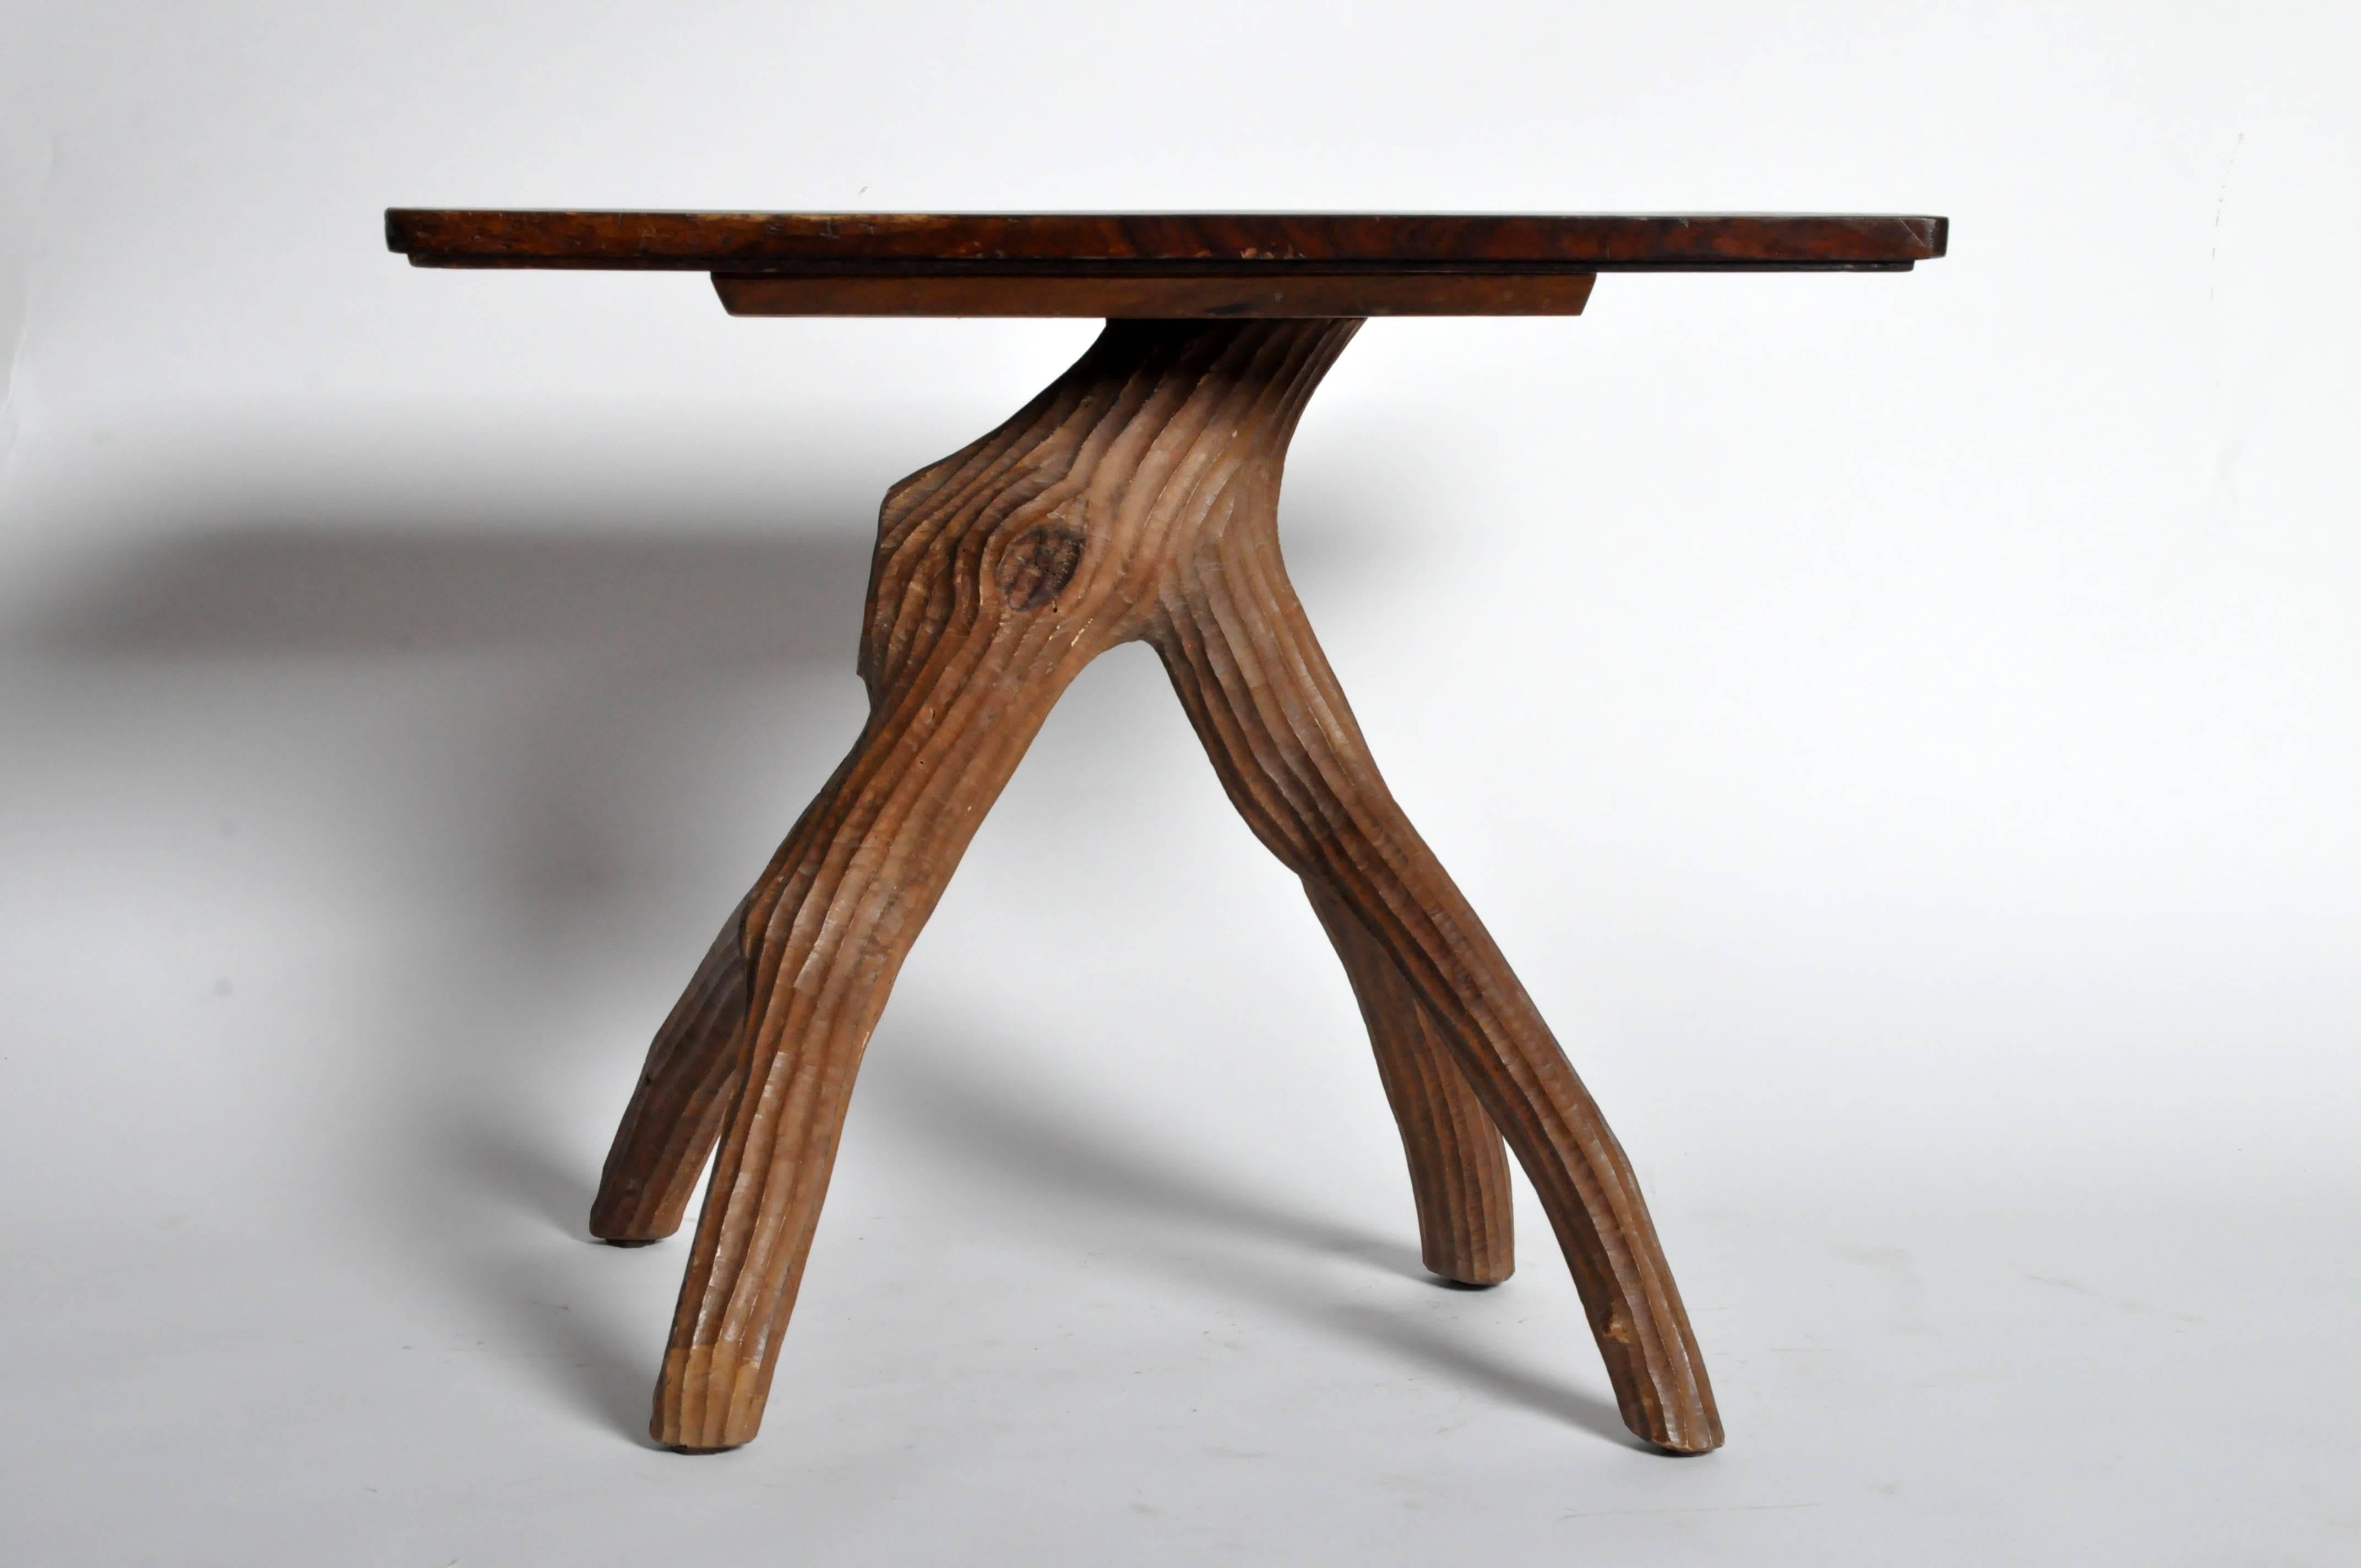 The rectangular top rests on a naturalistic tree branch-form carved table base that is sure to add rustic charm to any space.